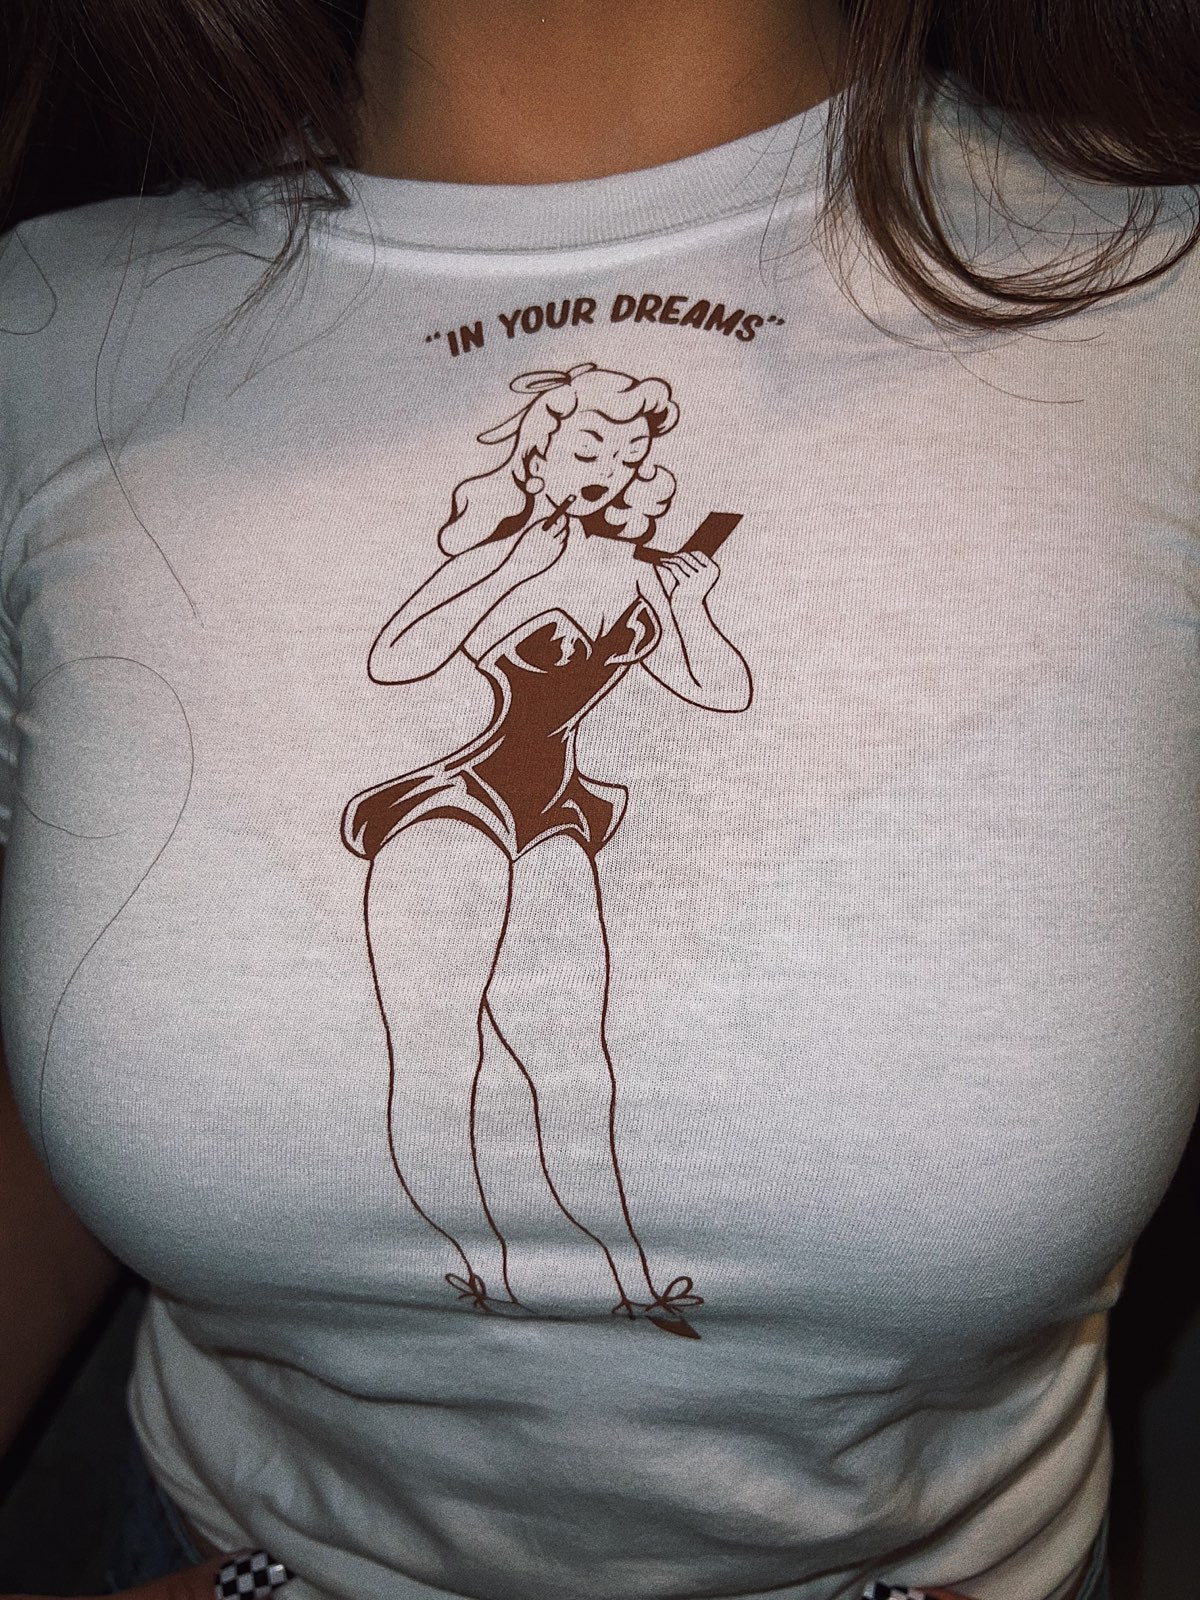 In your dreams pin up girl tee